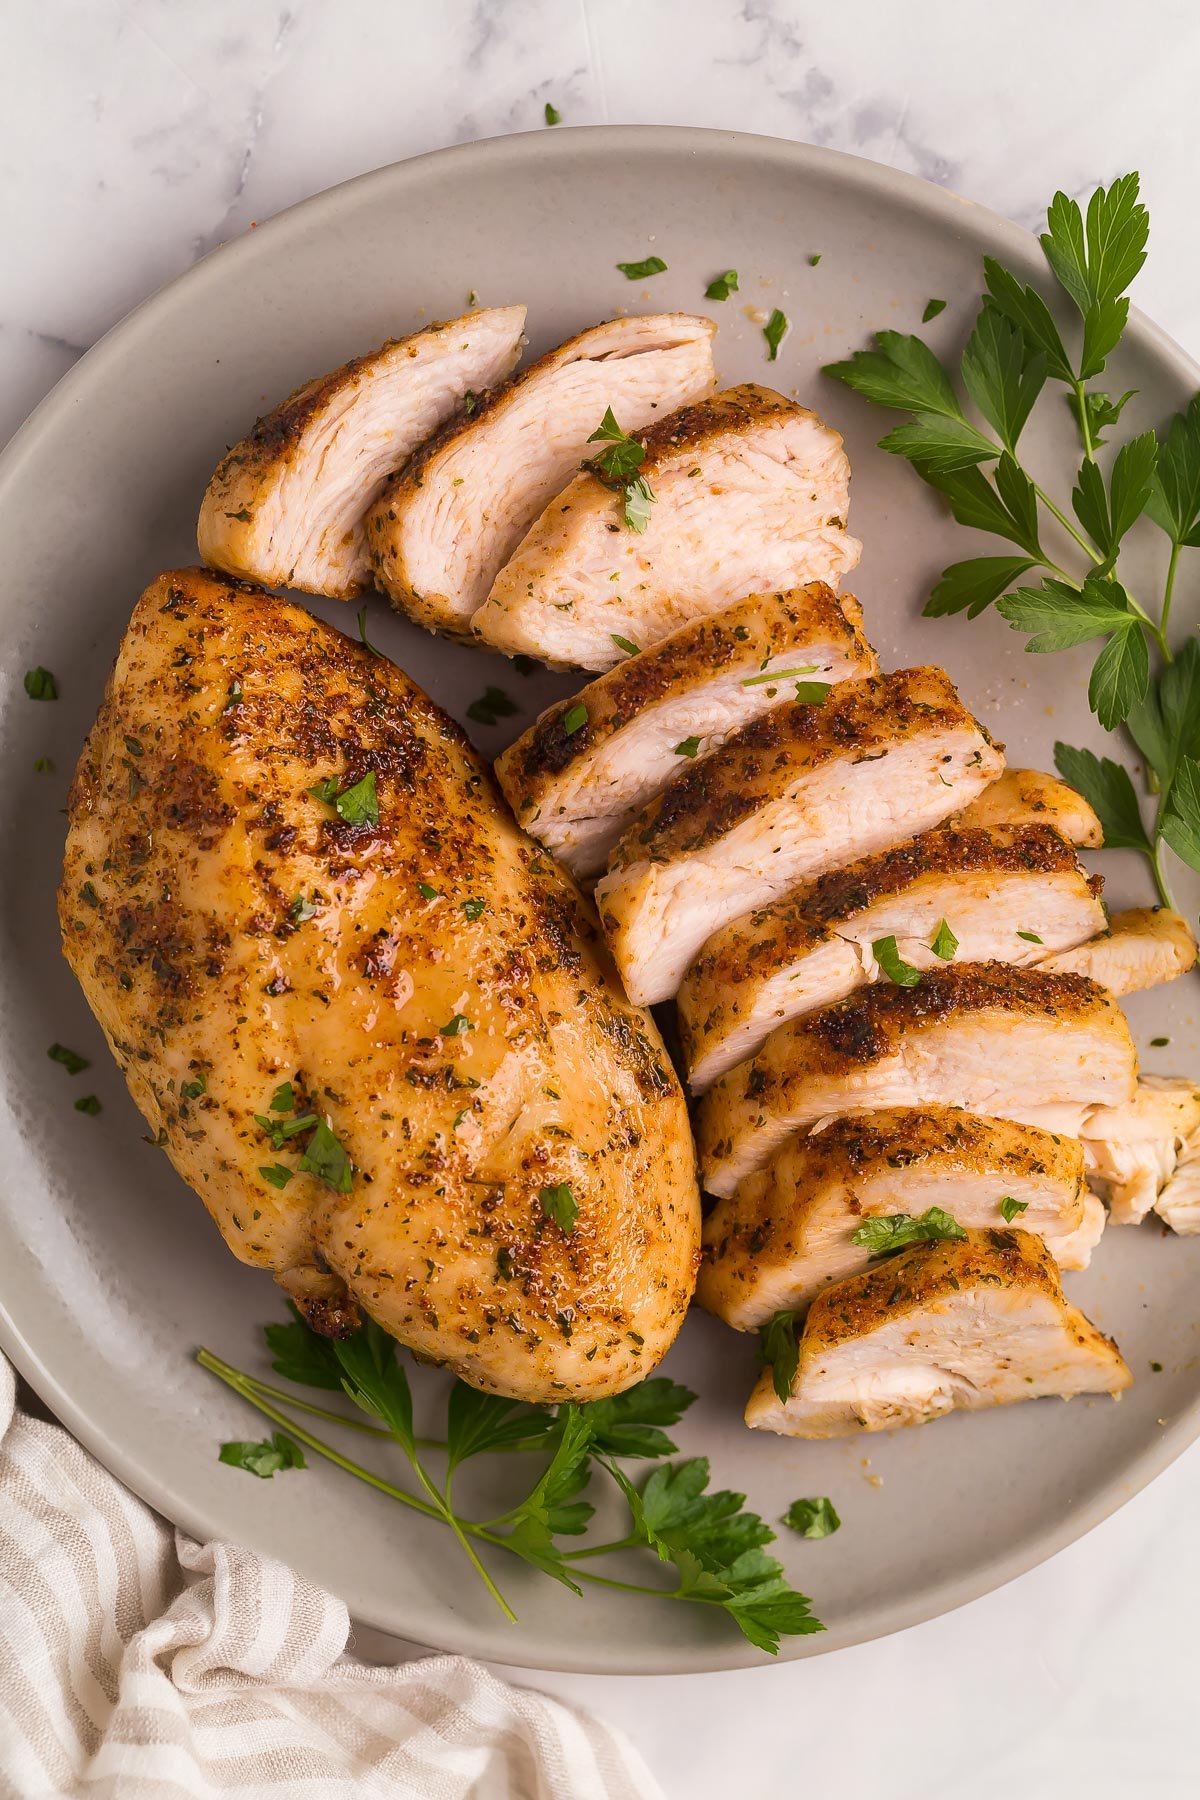 plate with one whole chicken breast and one sliced chicken breast.